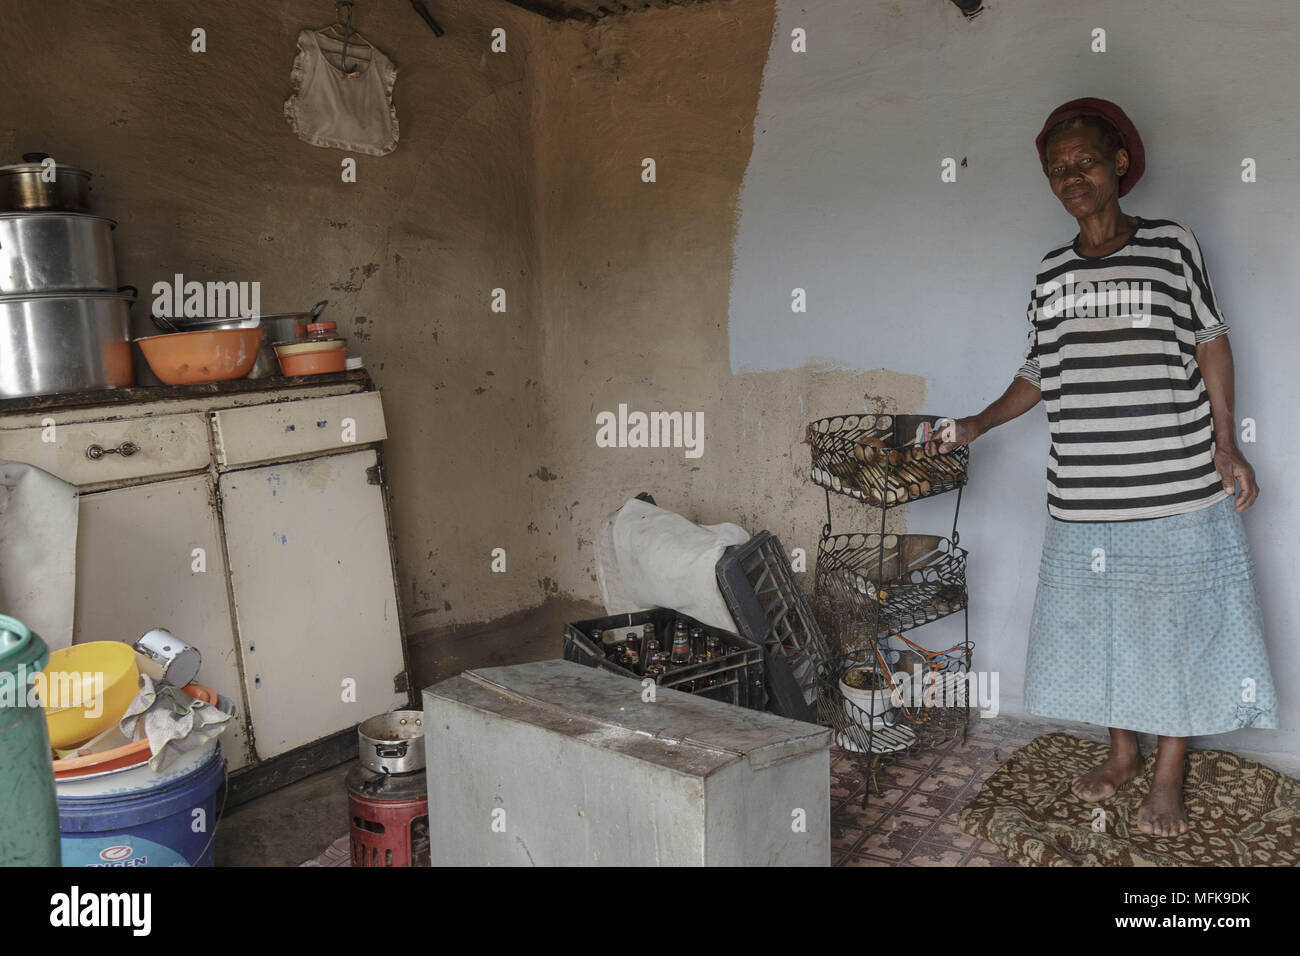 January 13, 2018 - Matatiele, Eastern Cape, South Africa - Martha, 67, stands in the kitchen of her small mud house. (Credit Image: © Stefan Kleinowitz via ZUMA Wire) Stock Photo